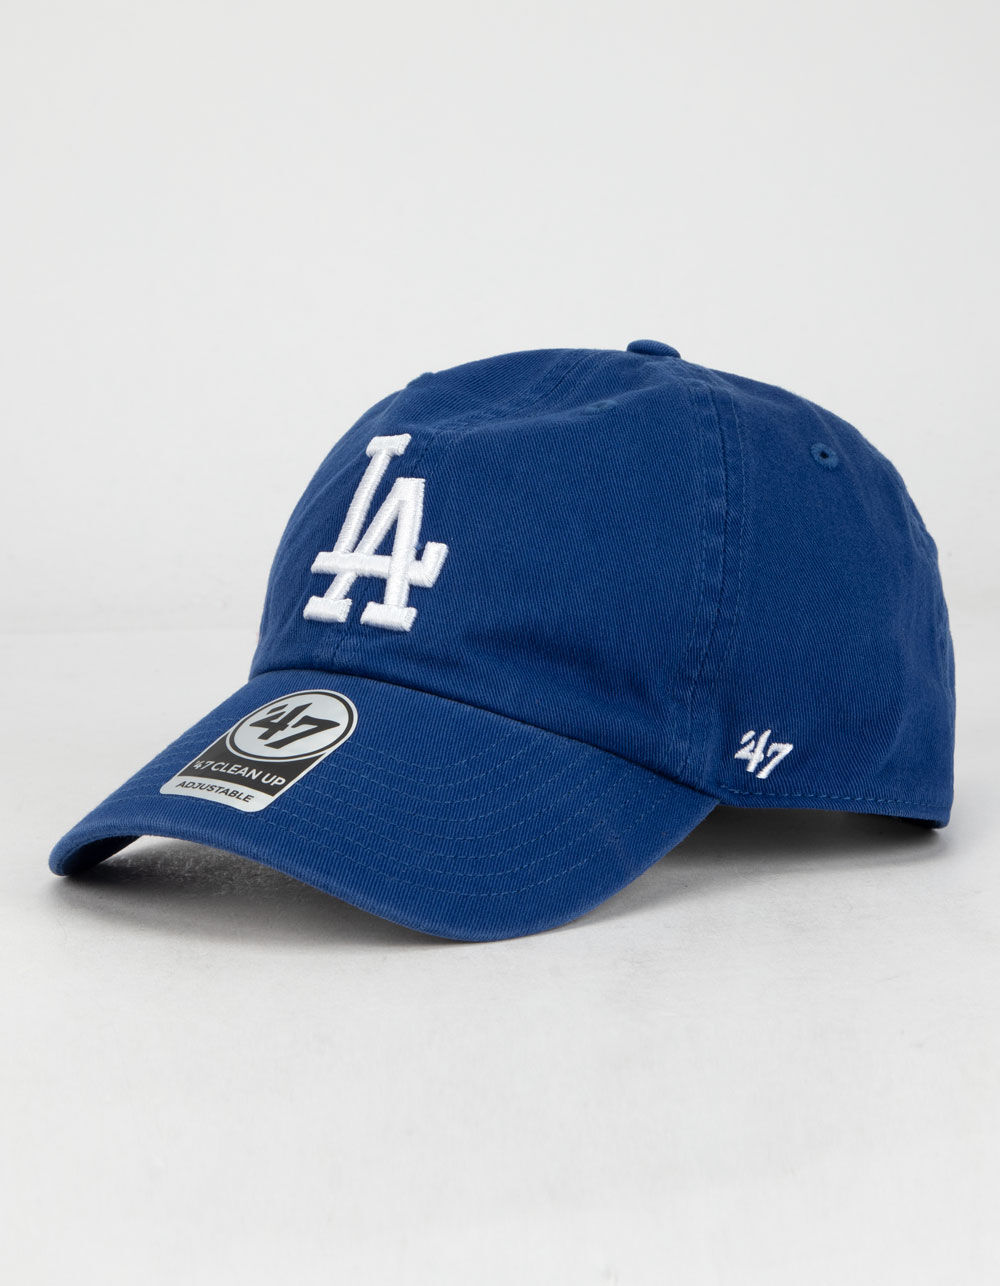 2015 MLB All-Star caps feature horizontal stripes on the front - True Blue  LA